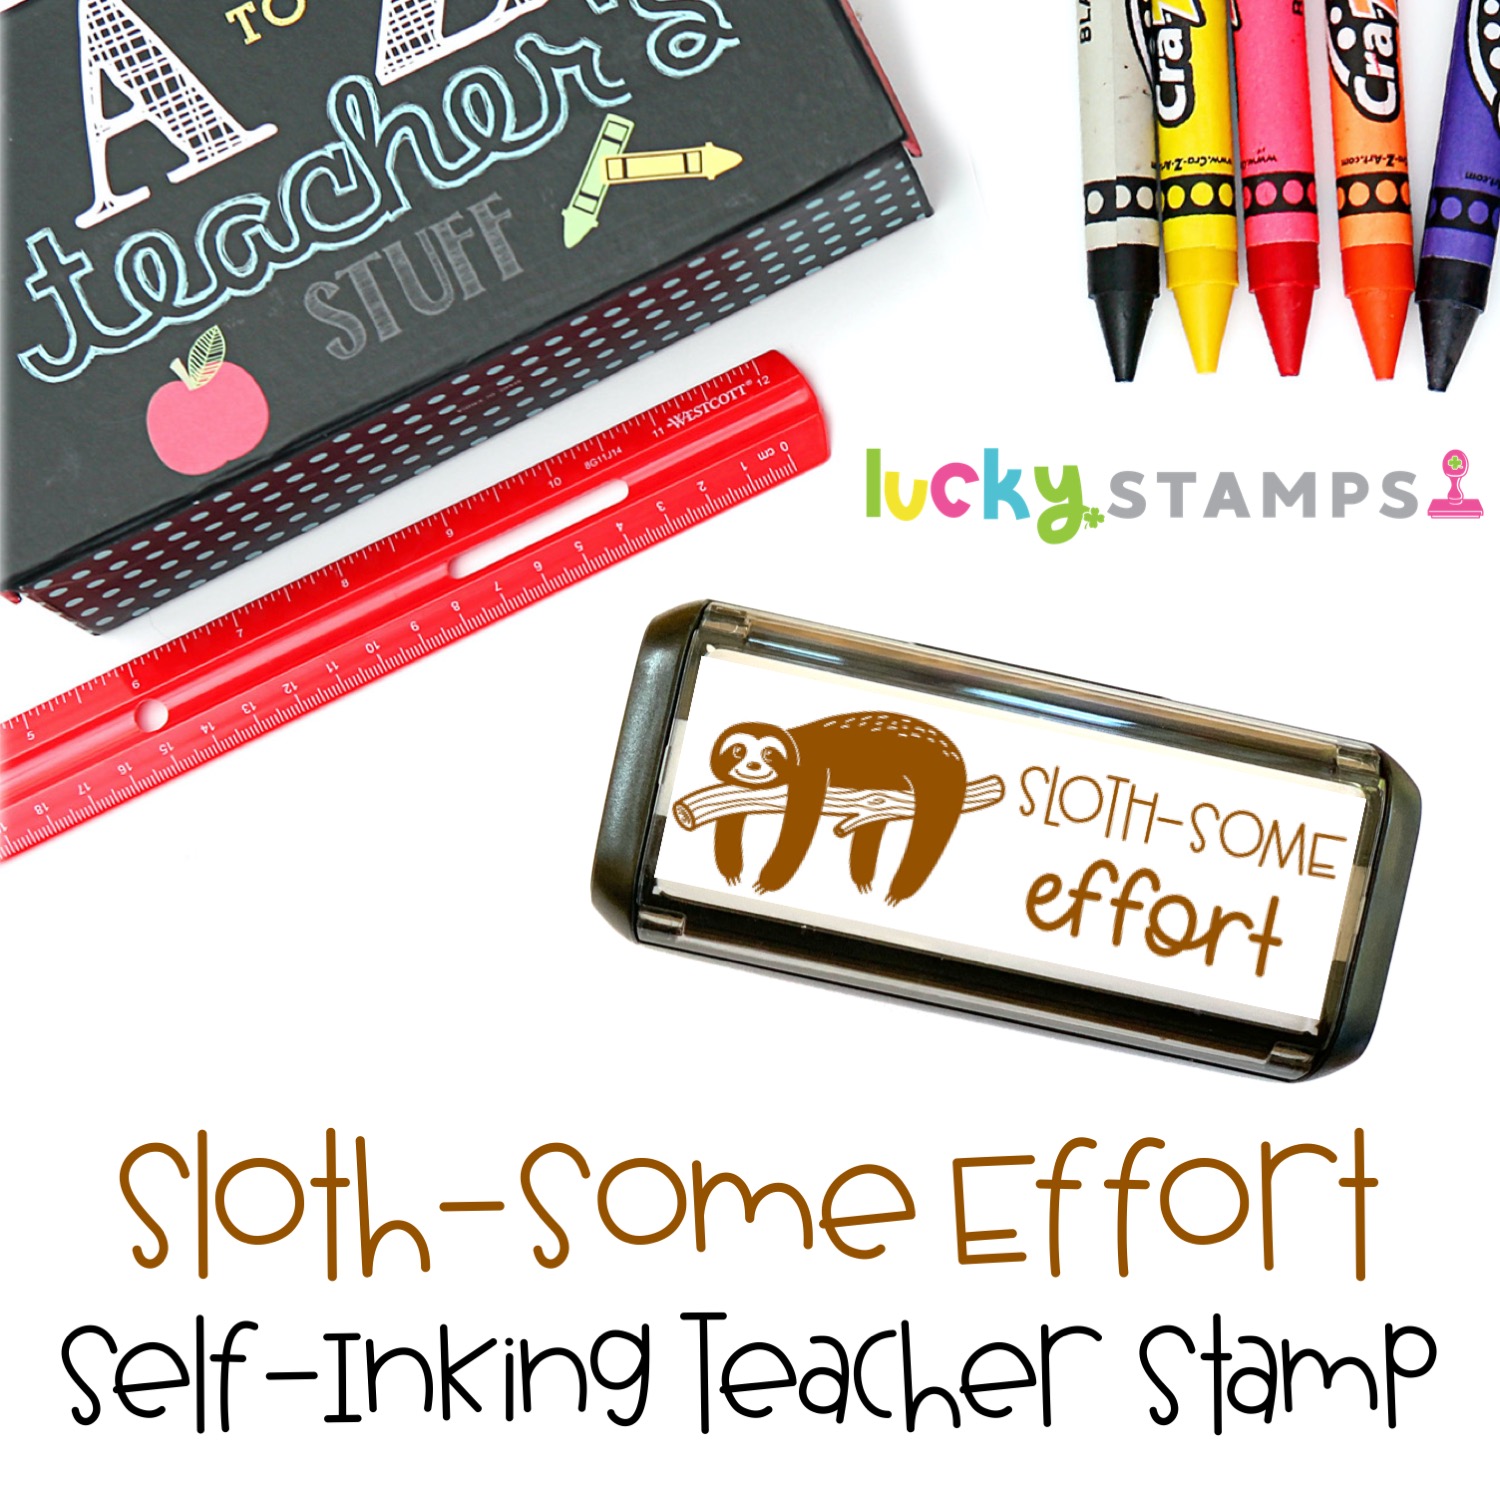 Personalized Self-inking Teacher Stamp Totally Sloth-some